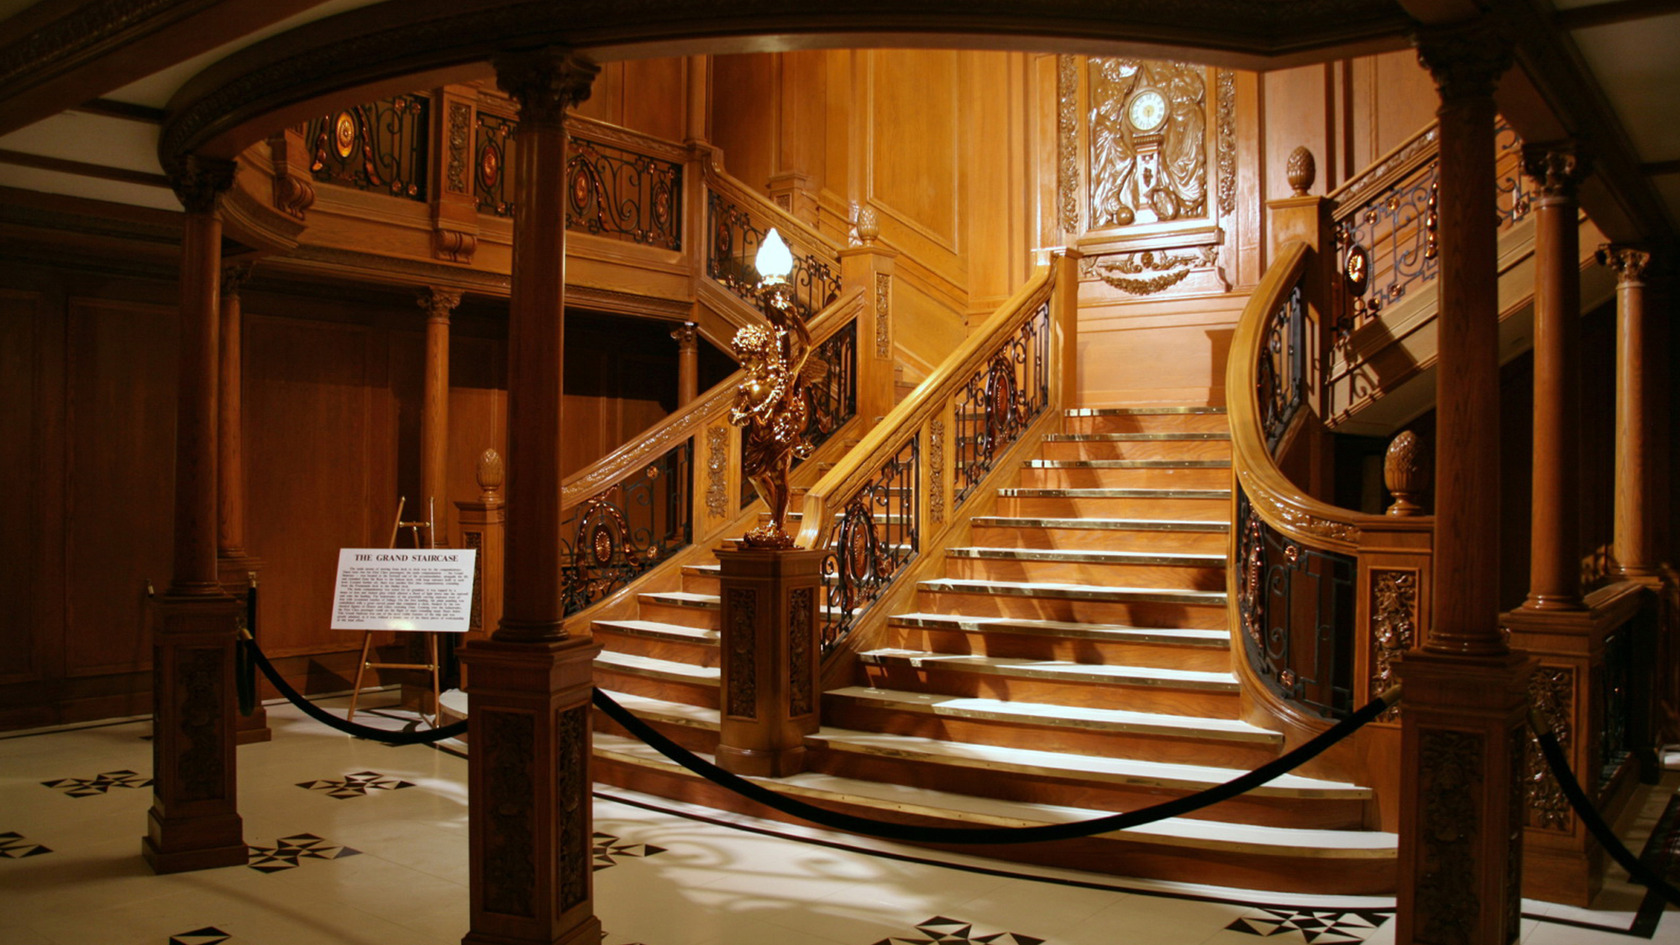 Amazing Staircase On The Titanic Ships Wallpap #10961 Wallpaper ...